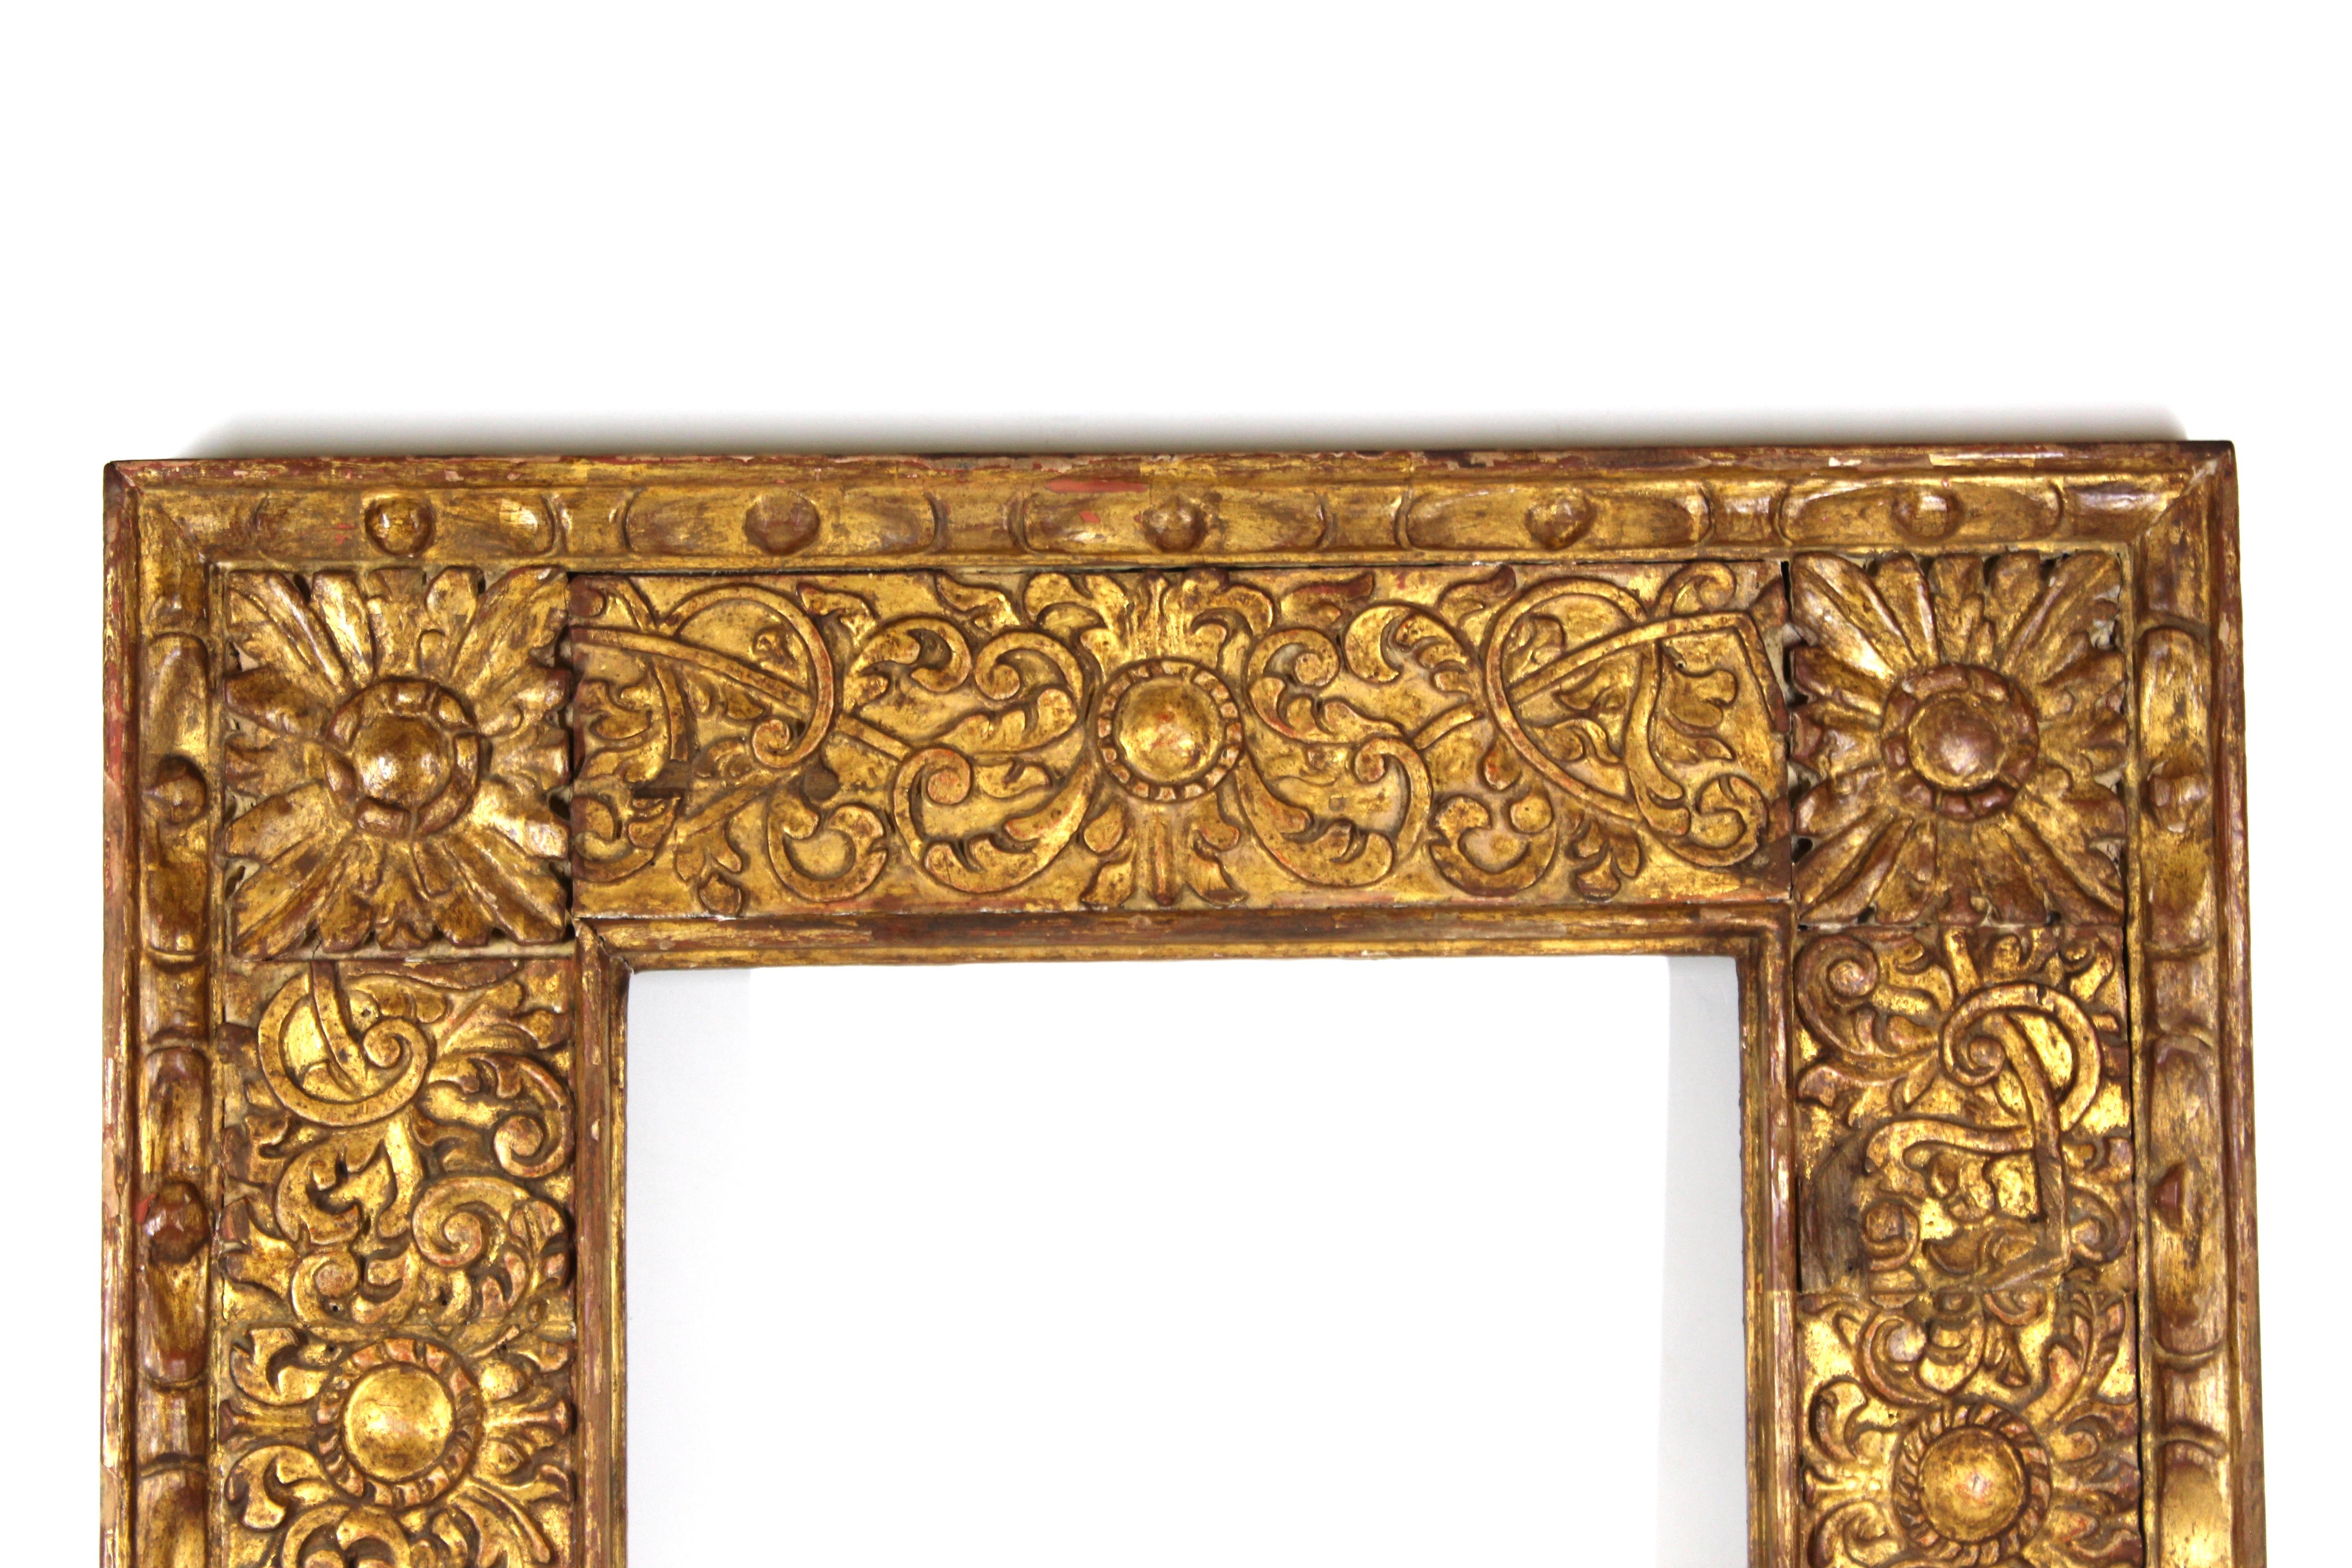 Spanish Colonial Baroque giltwood picture frame with heavy carved and hand-gilt elaborate foliage. The decorative scrolls, leaves and floral elements make this frame an outstanding example of the Baroque period, perfect for framing a masterpiece or